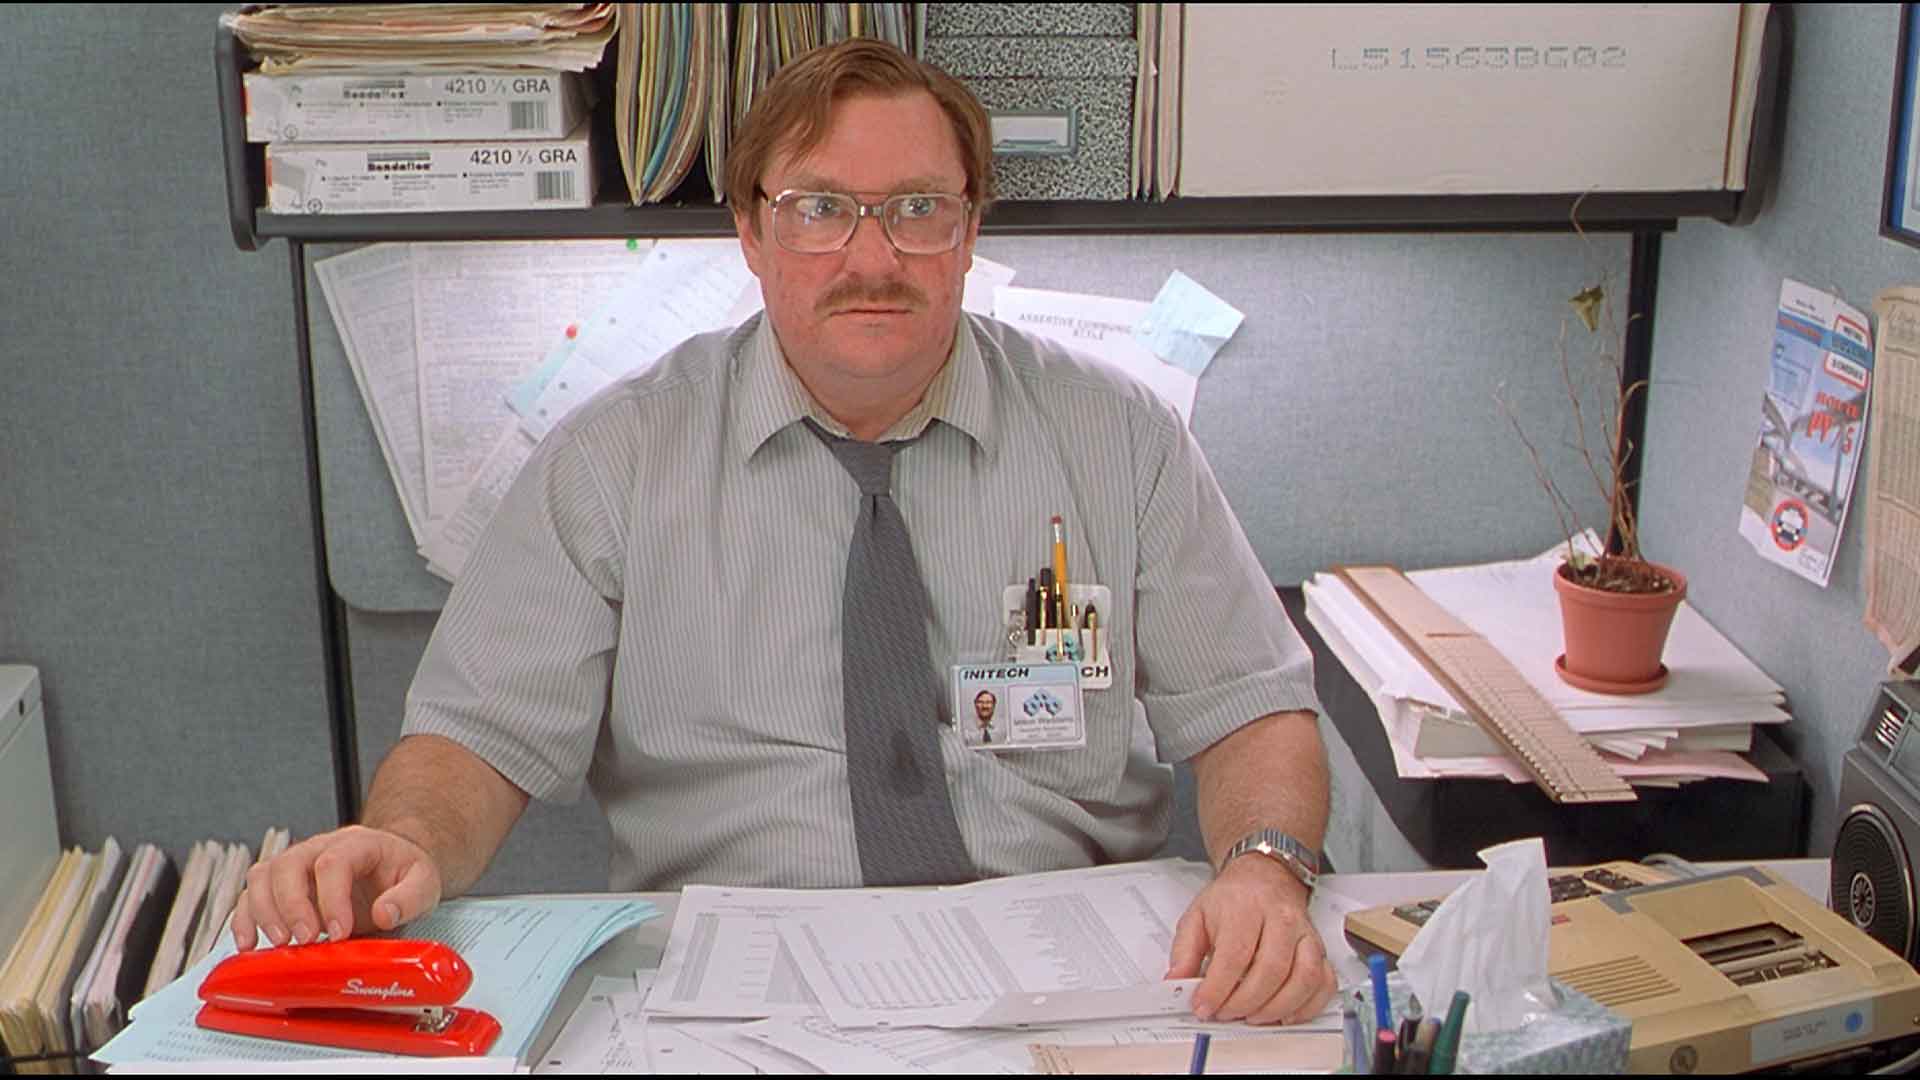 Top 25 Quotes from the movie Office Space (1999)